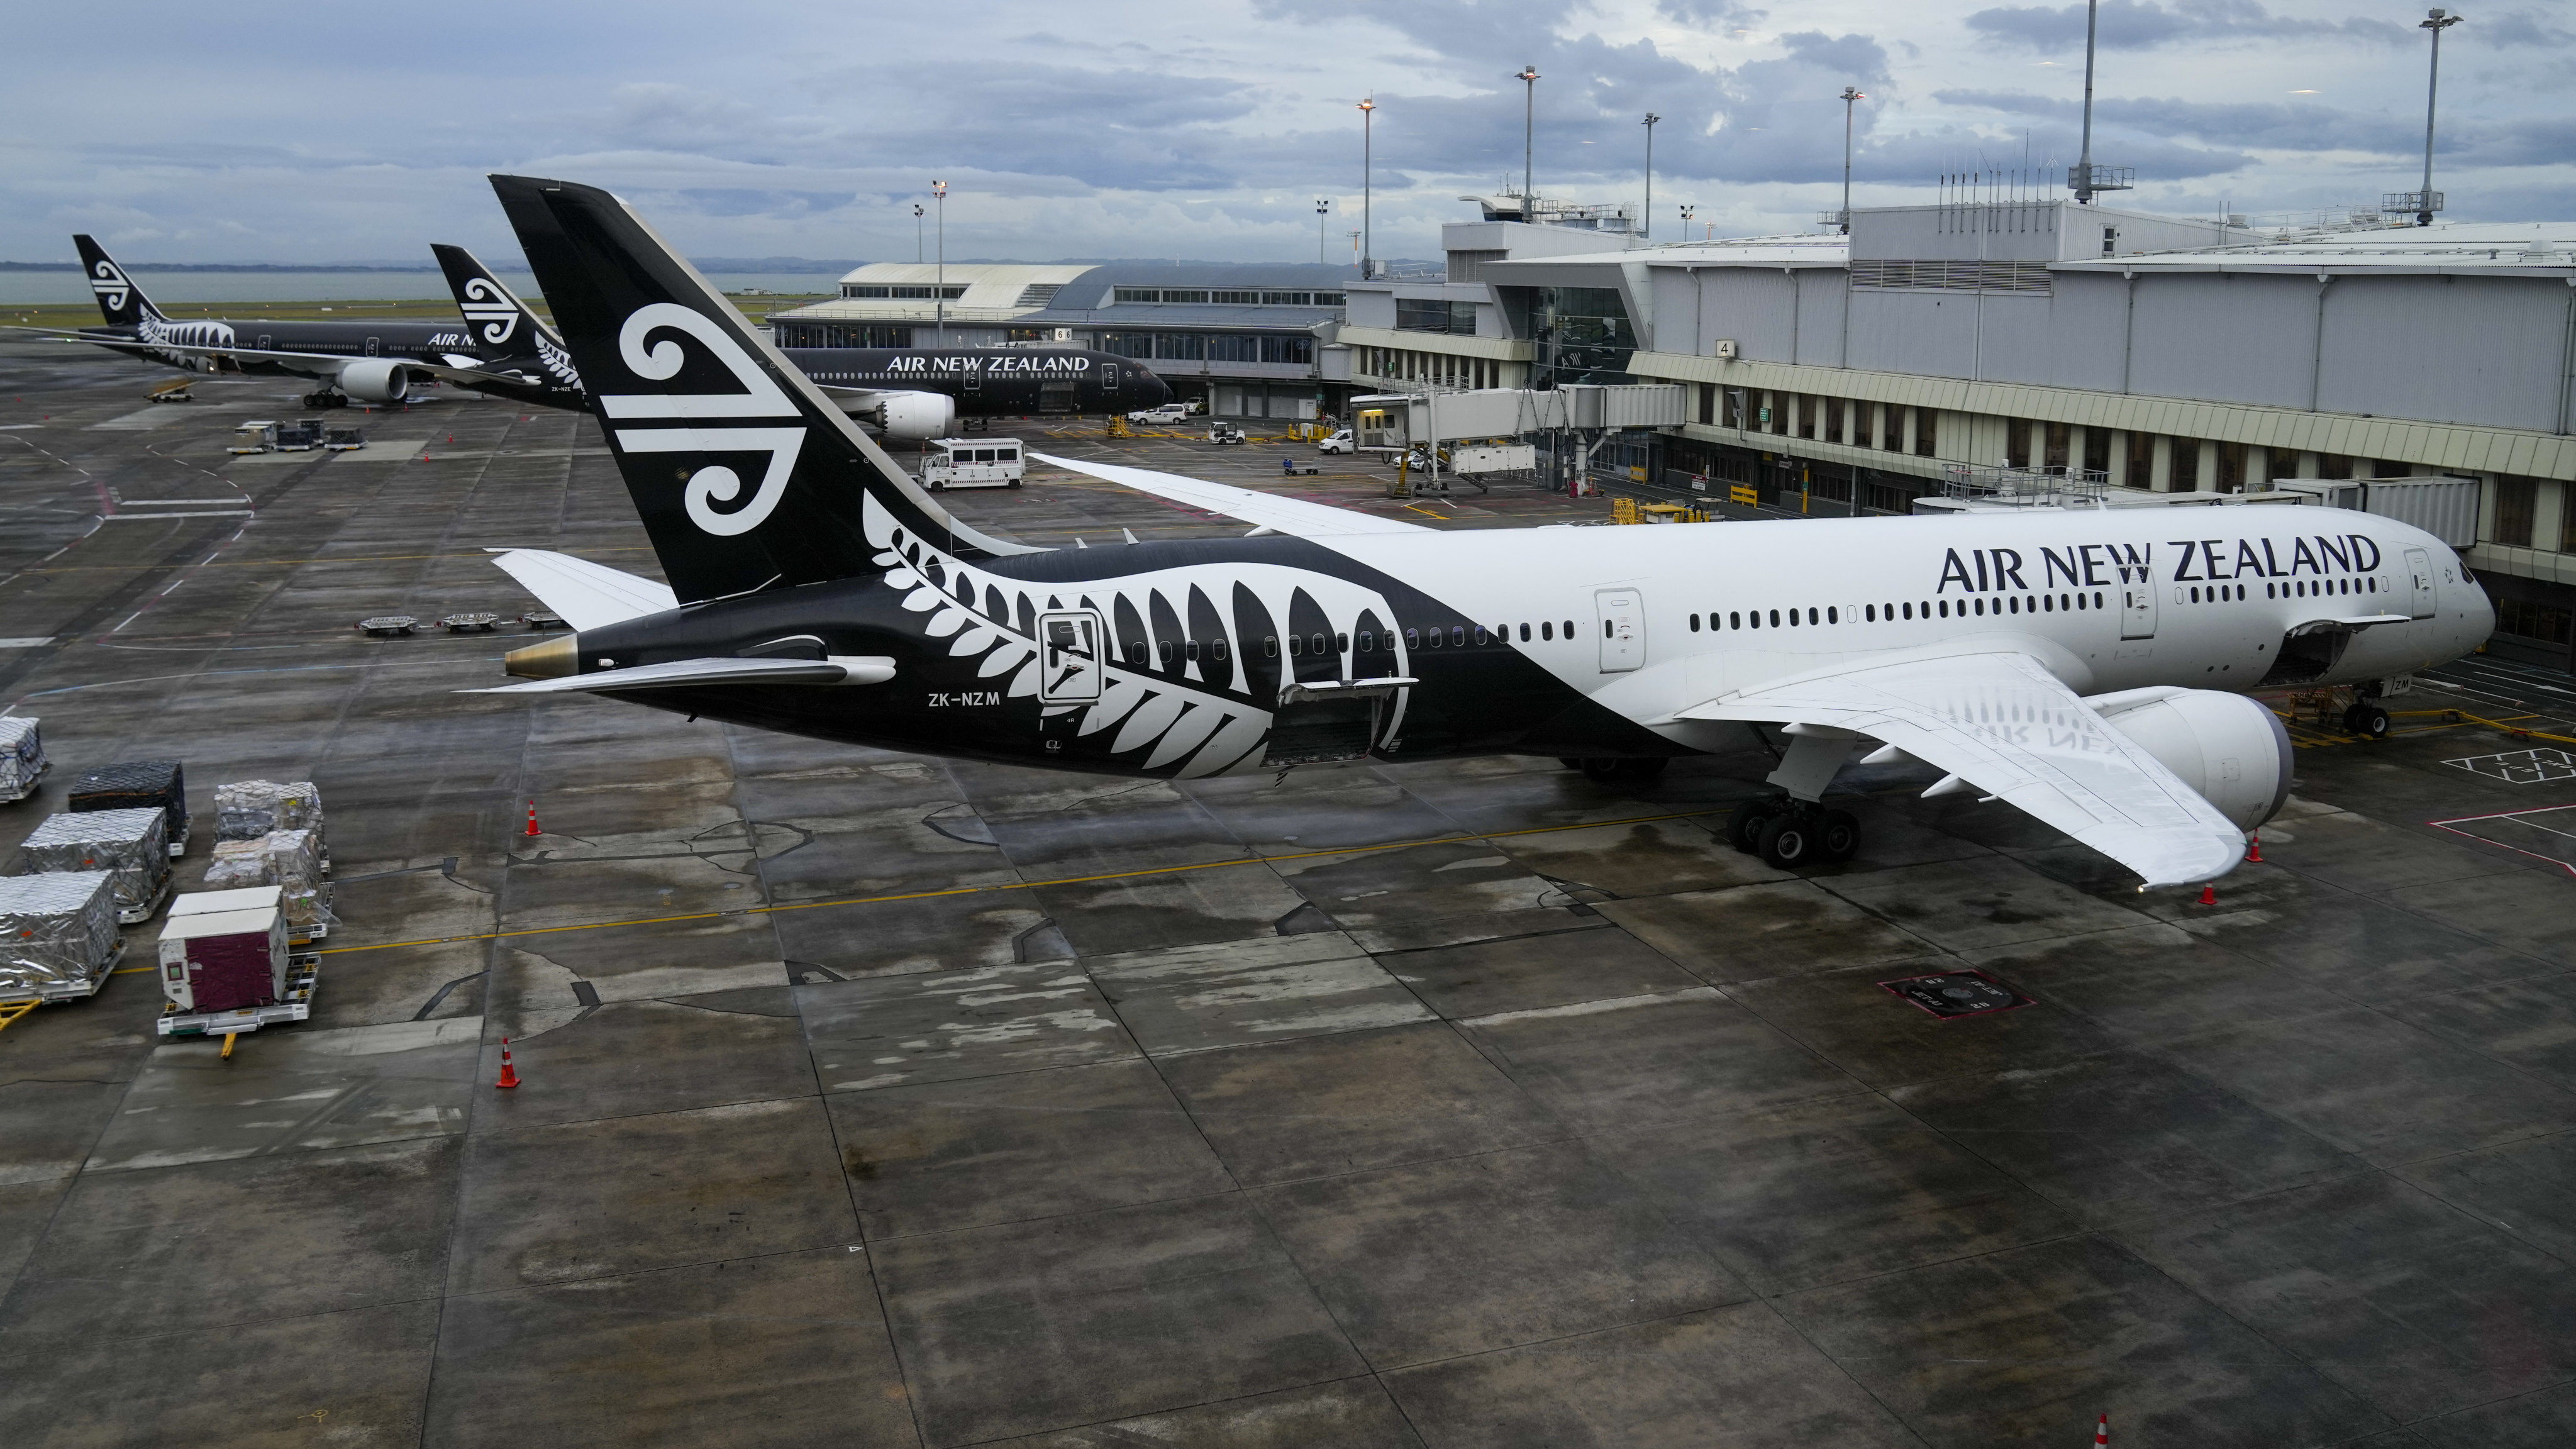 Air New Zealand plans to start direct flights to New York in September. Photo: AP